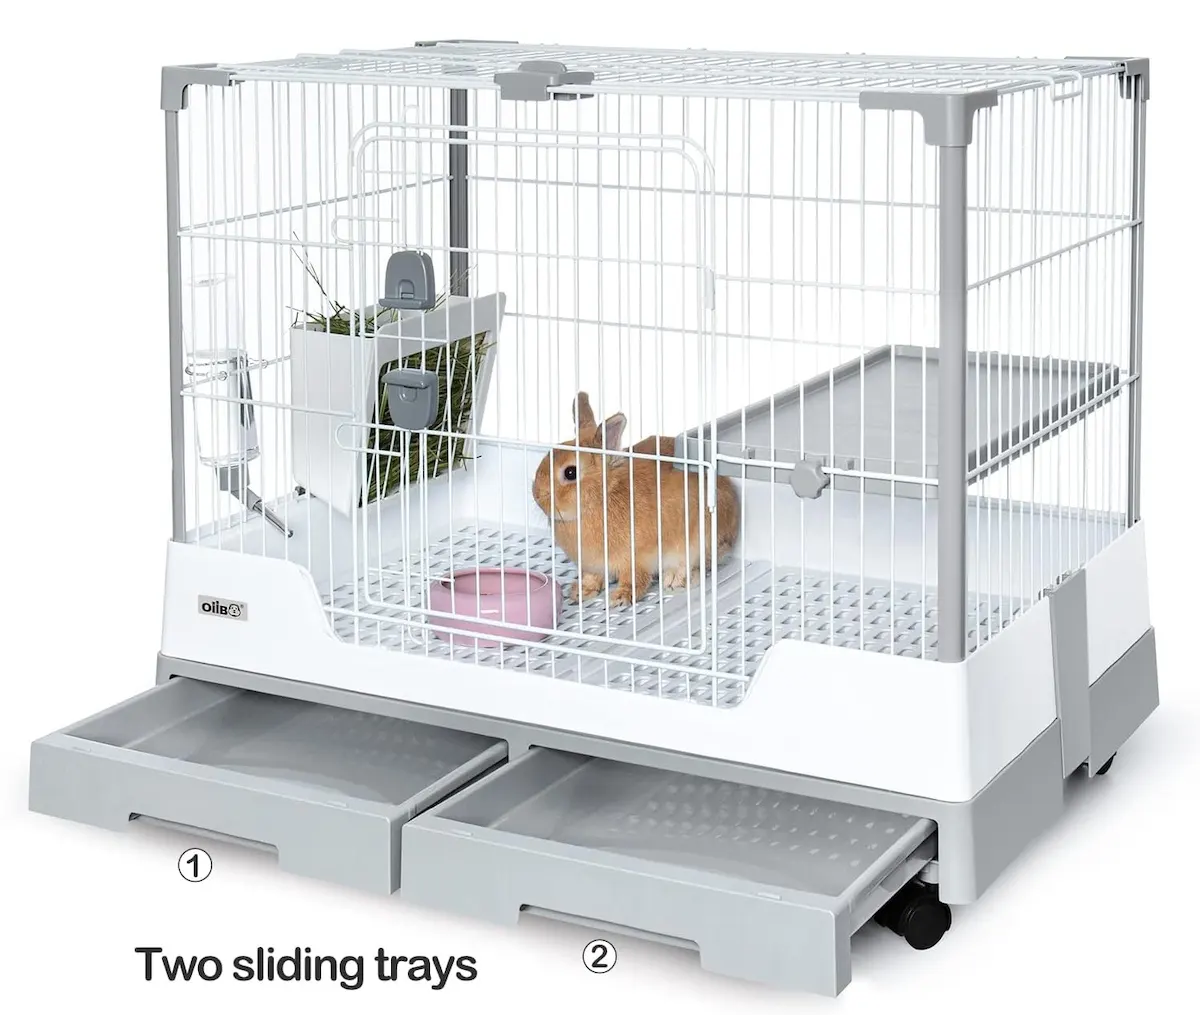 Oiibo cage with two sliding trays open